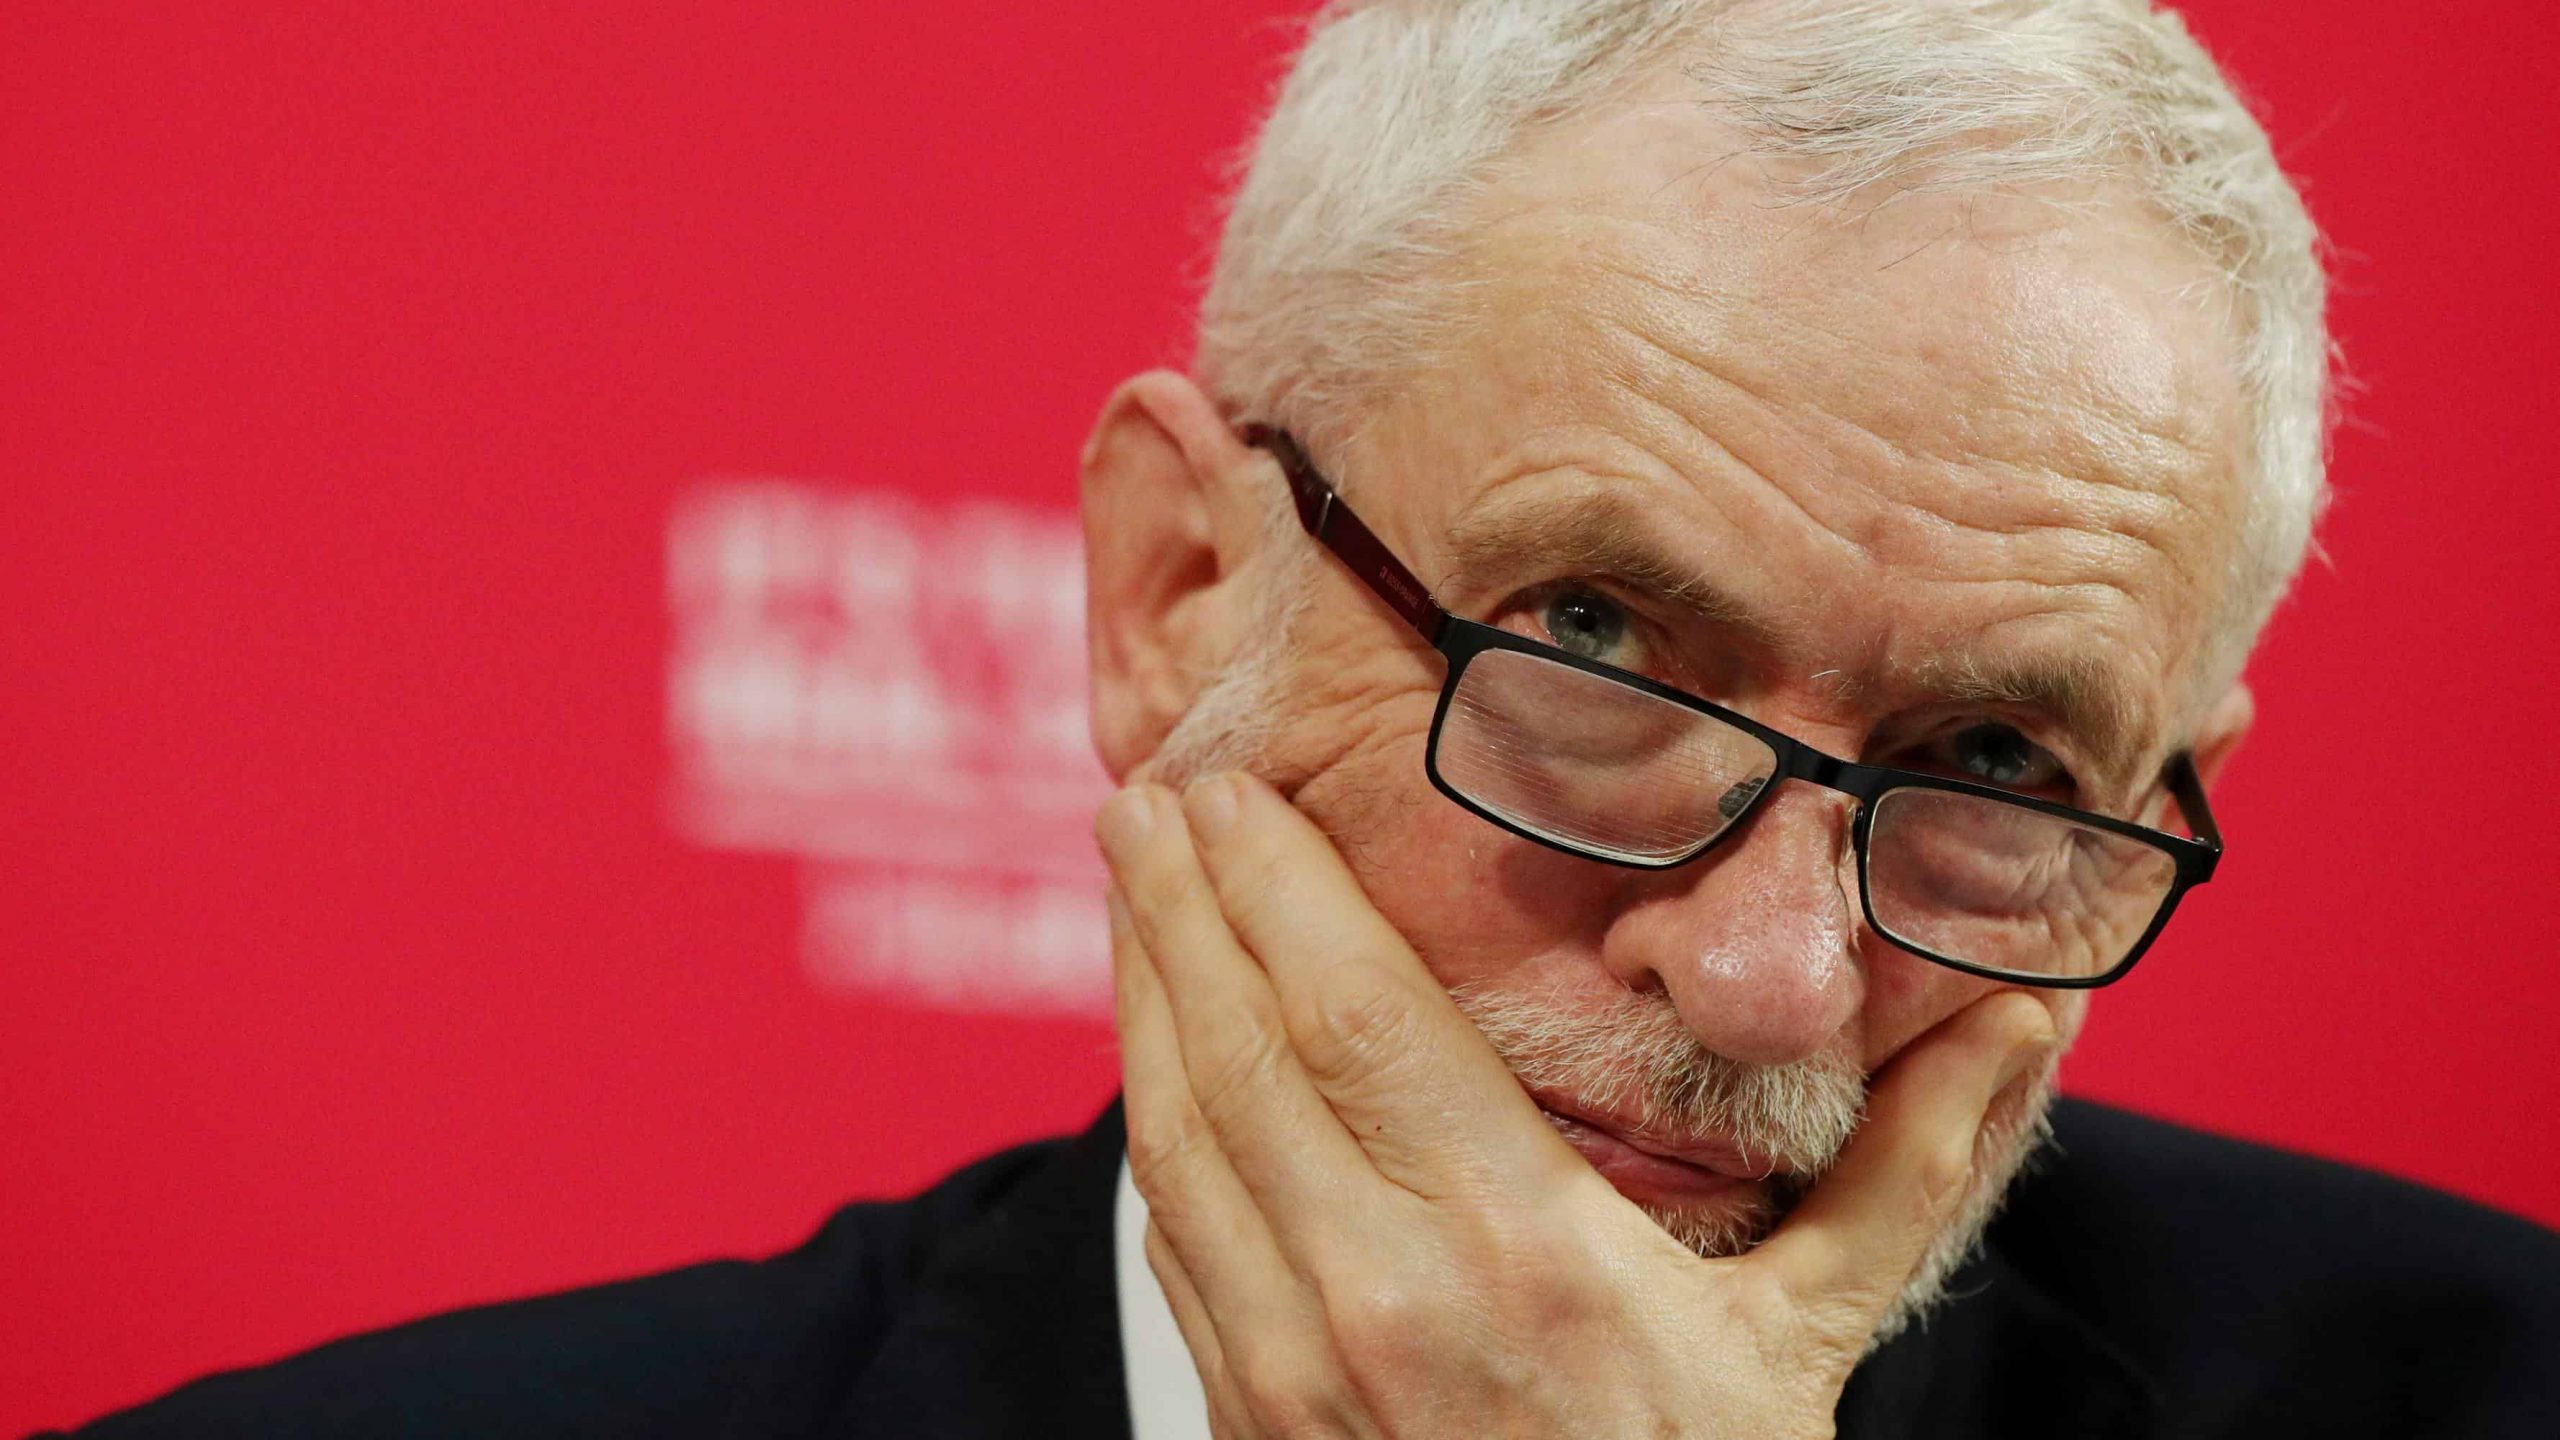 Leaked dossier shows Labour party officials worked against Corbyn in a bid to lose 2017 general election